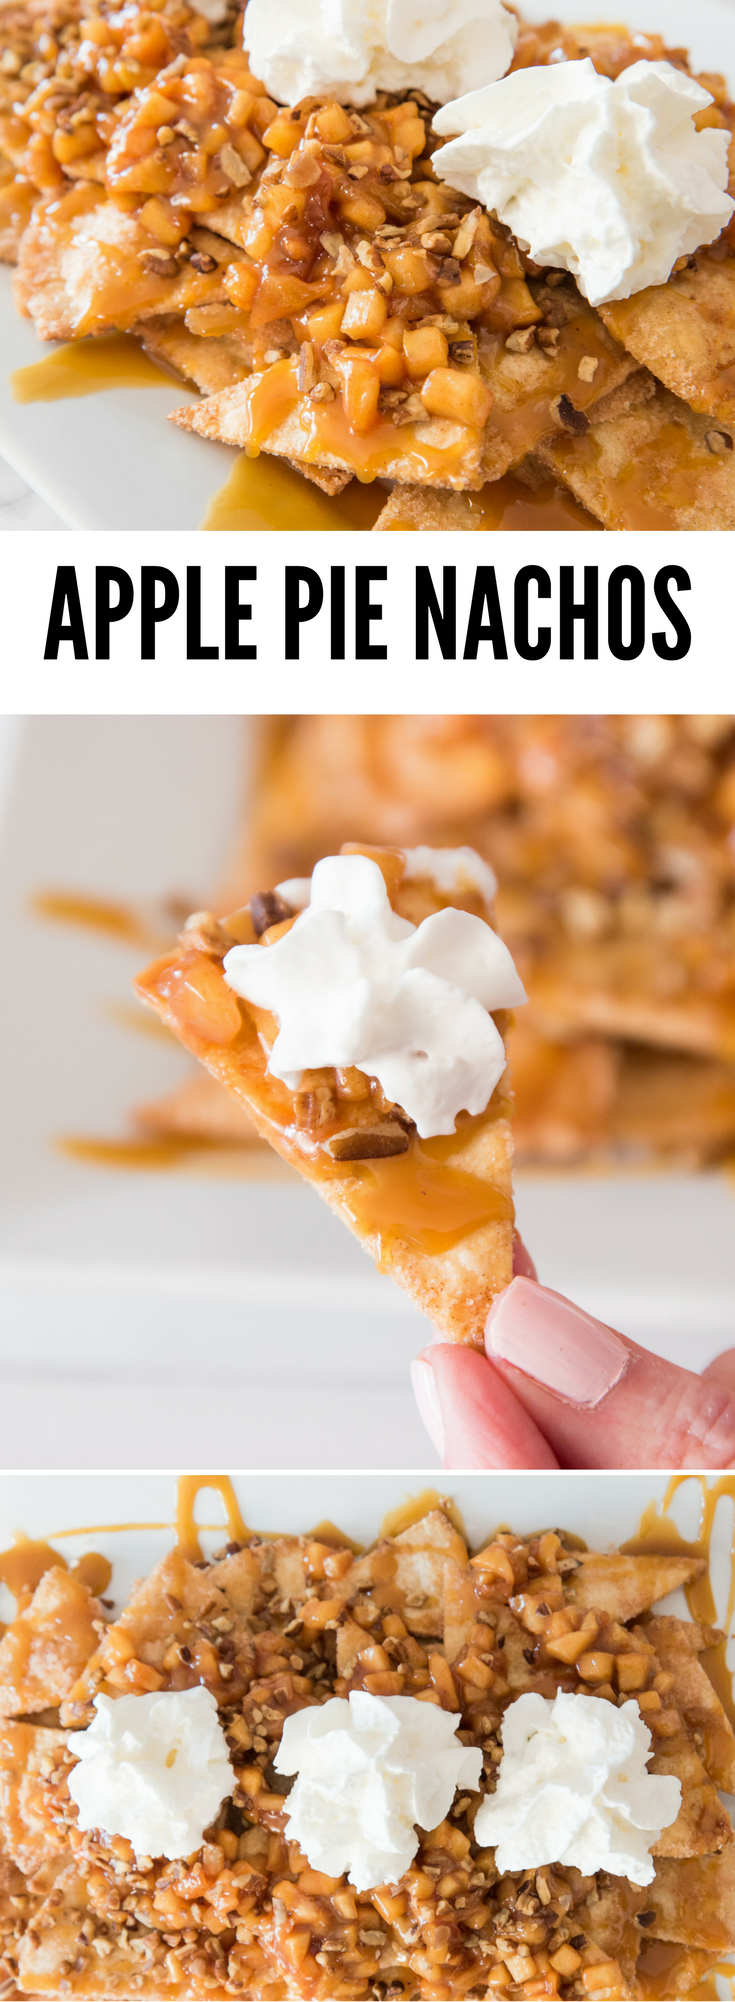 Apple Pie Nachos recipe is the perfect fall dessert you can eat all day long. It's a scrumptious and over-the-top unique dessert! -   25 unique apple recipes
 ideas